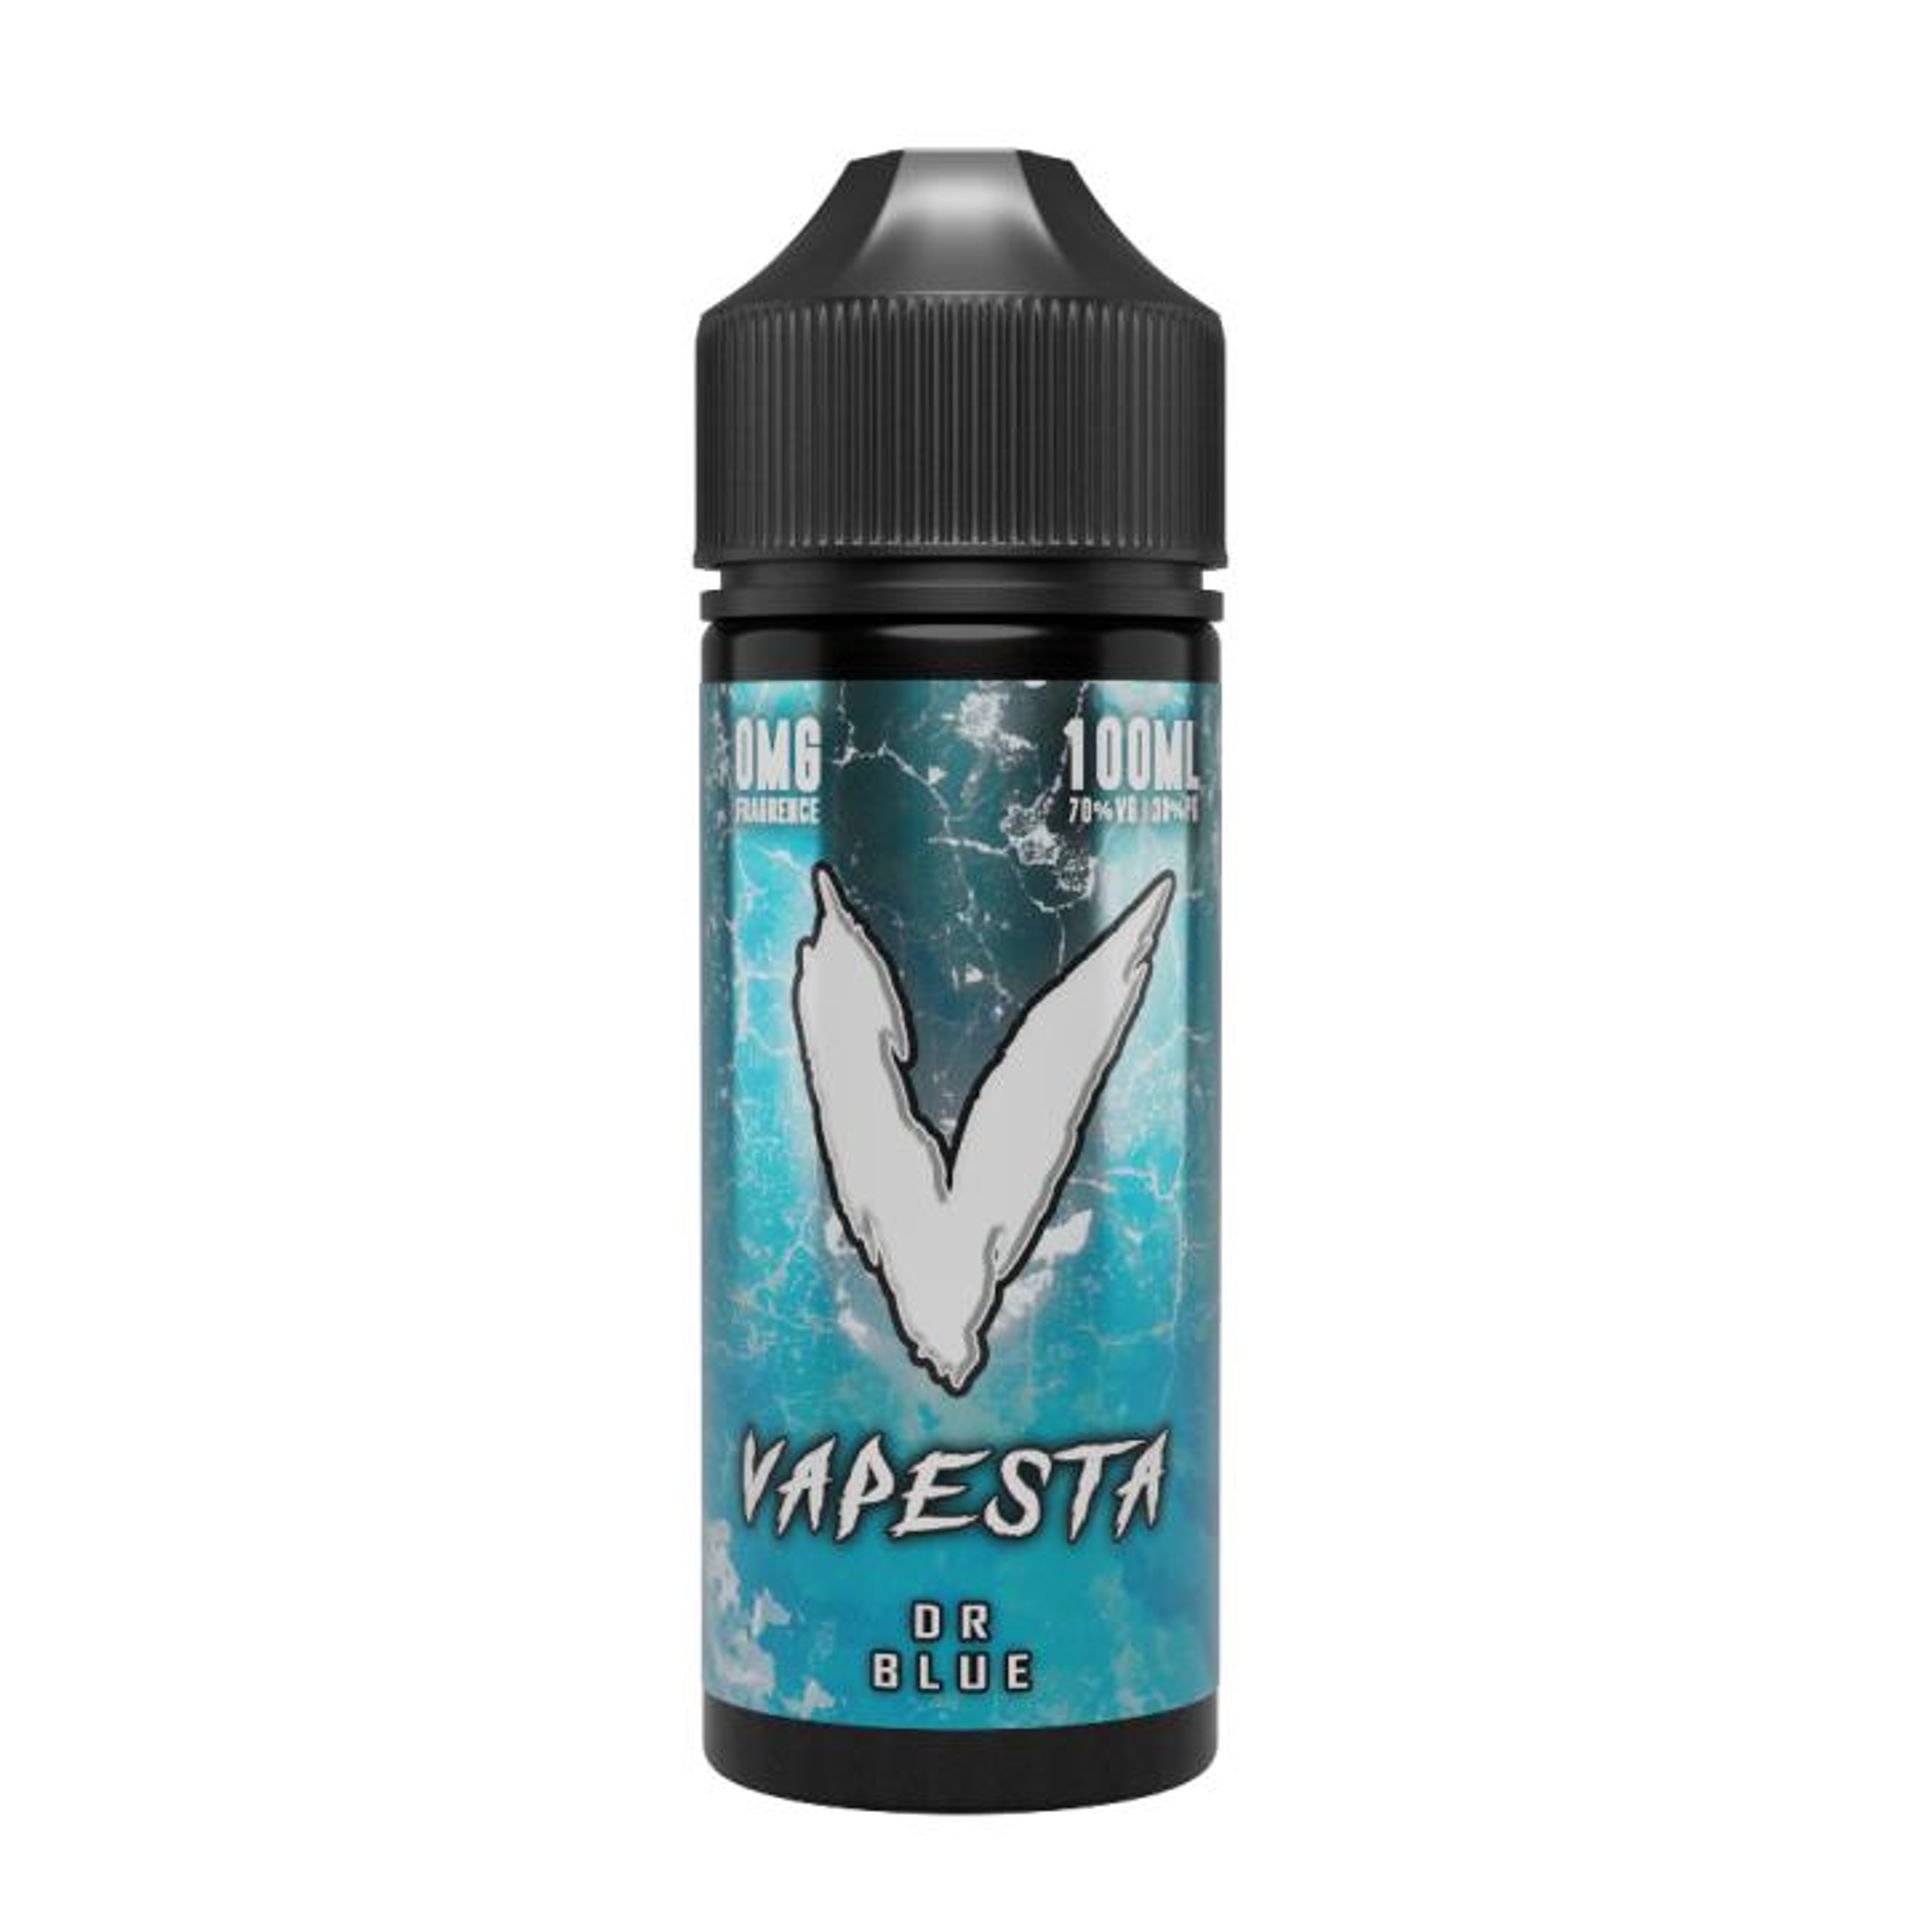 Image of Dr Blue by Vapesta by Ultimate Puff